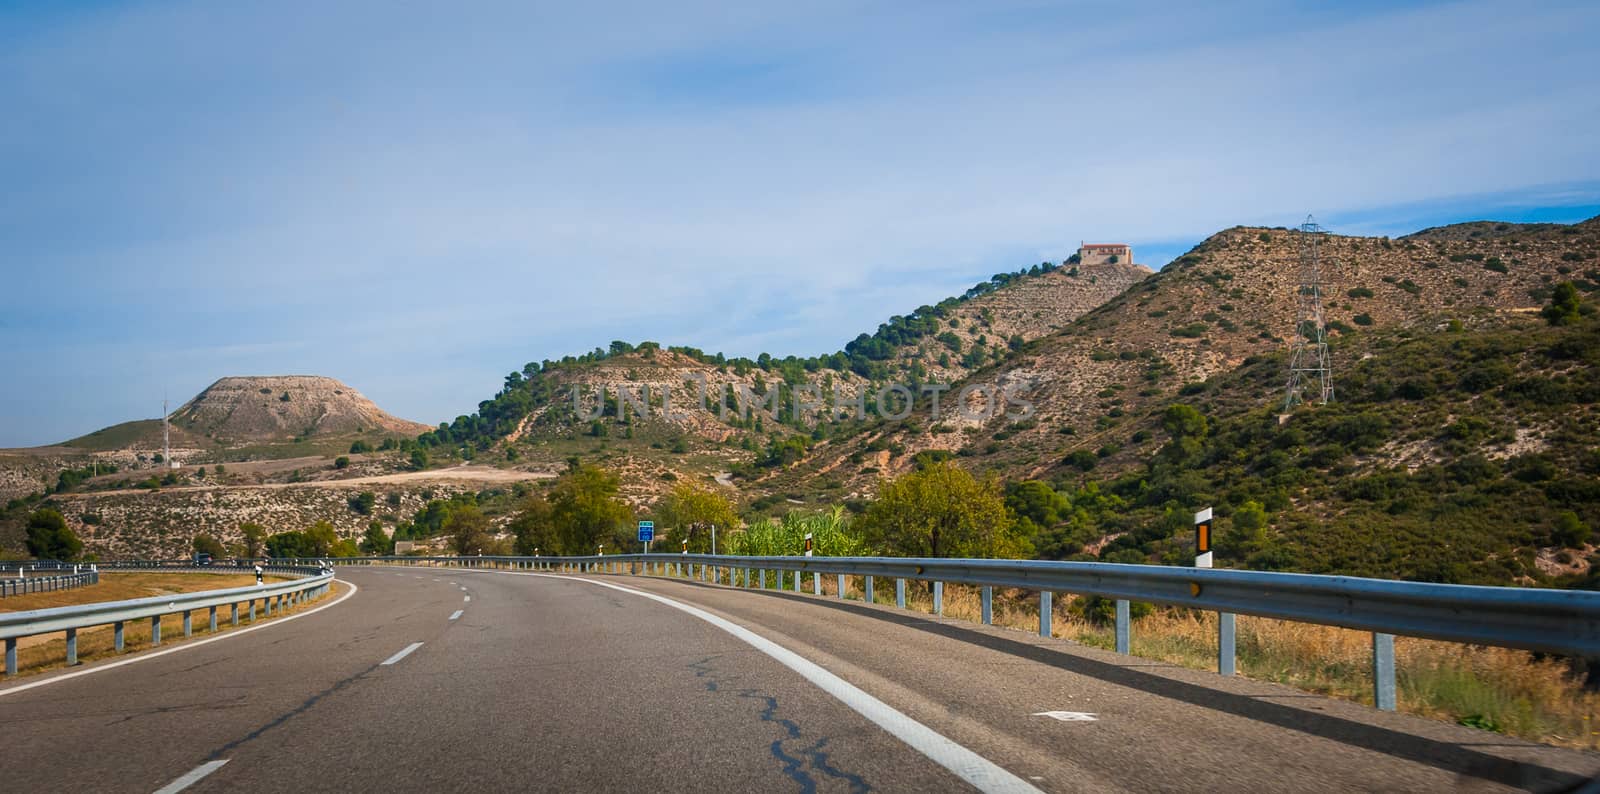 Road to Barcelona, Spain by valleyboi63